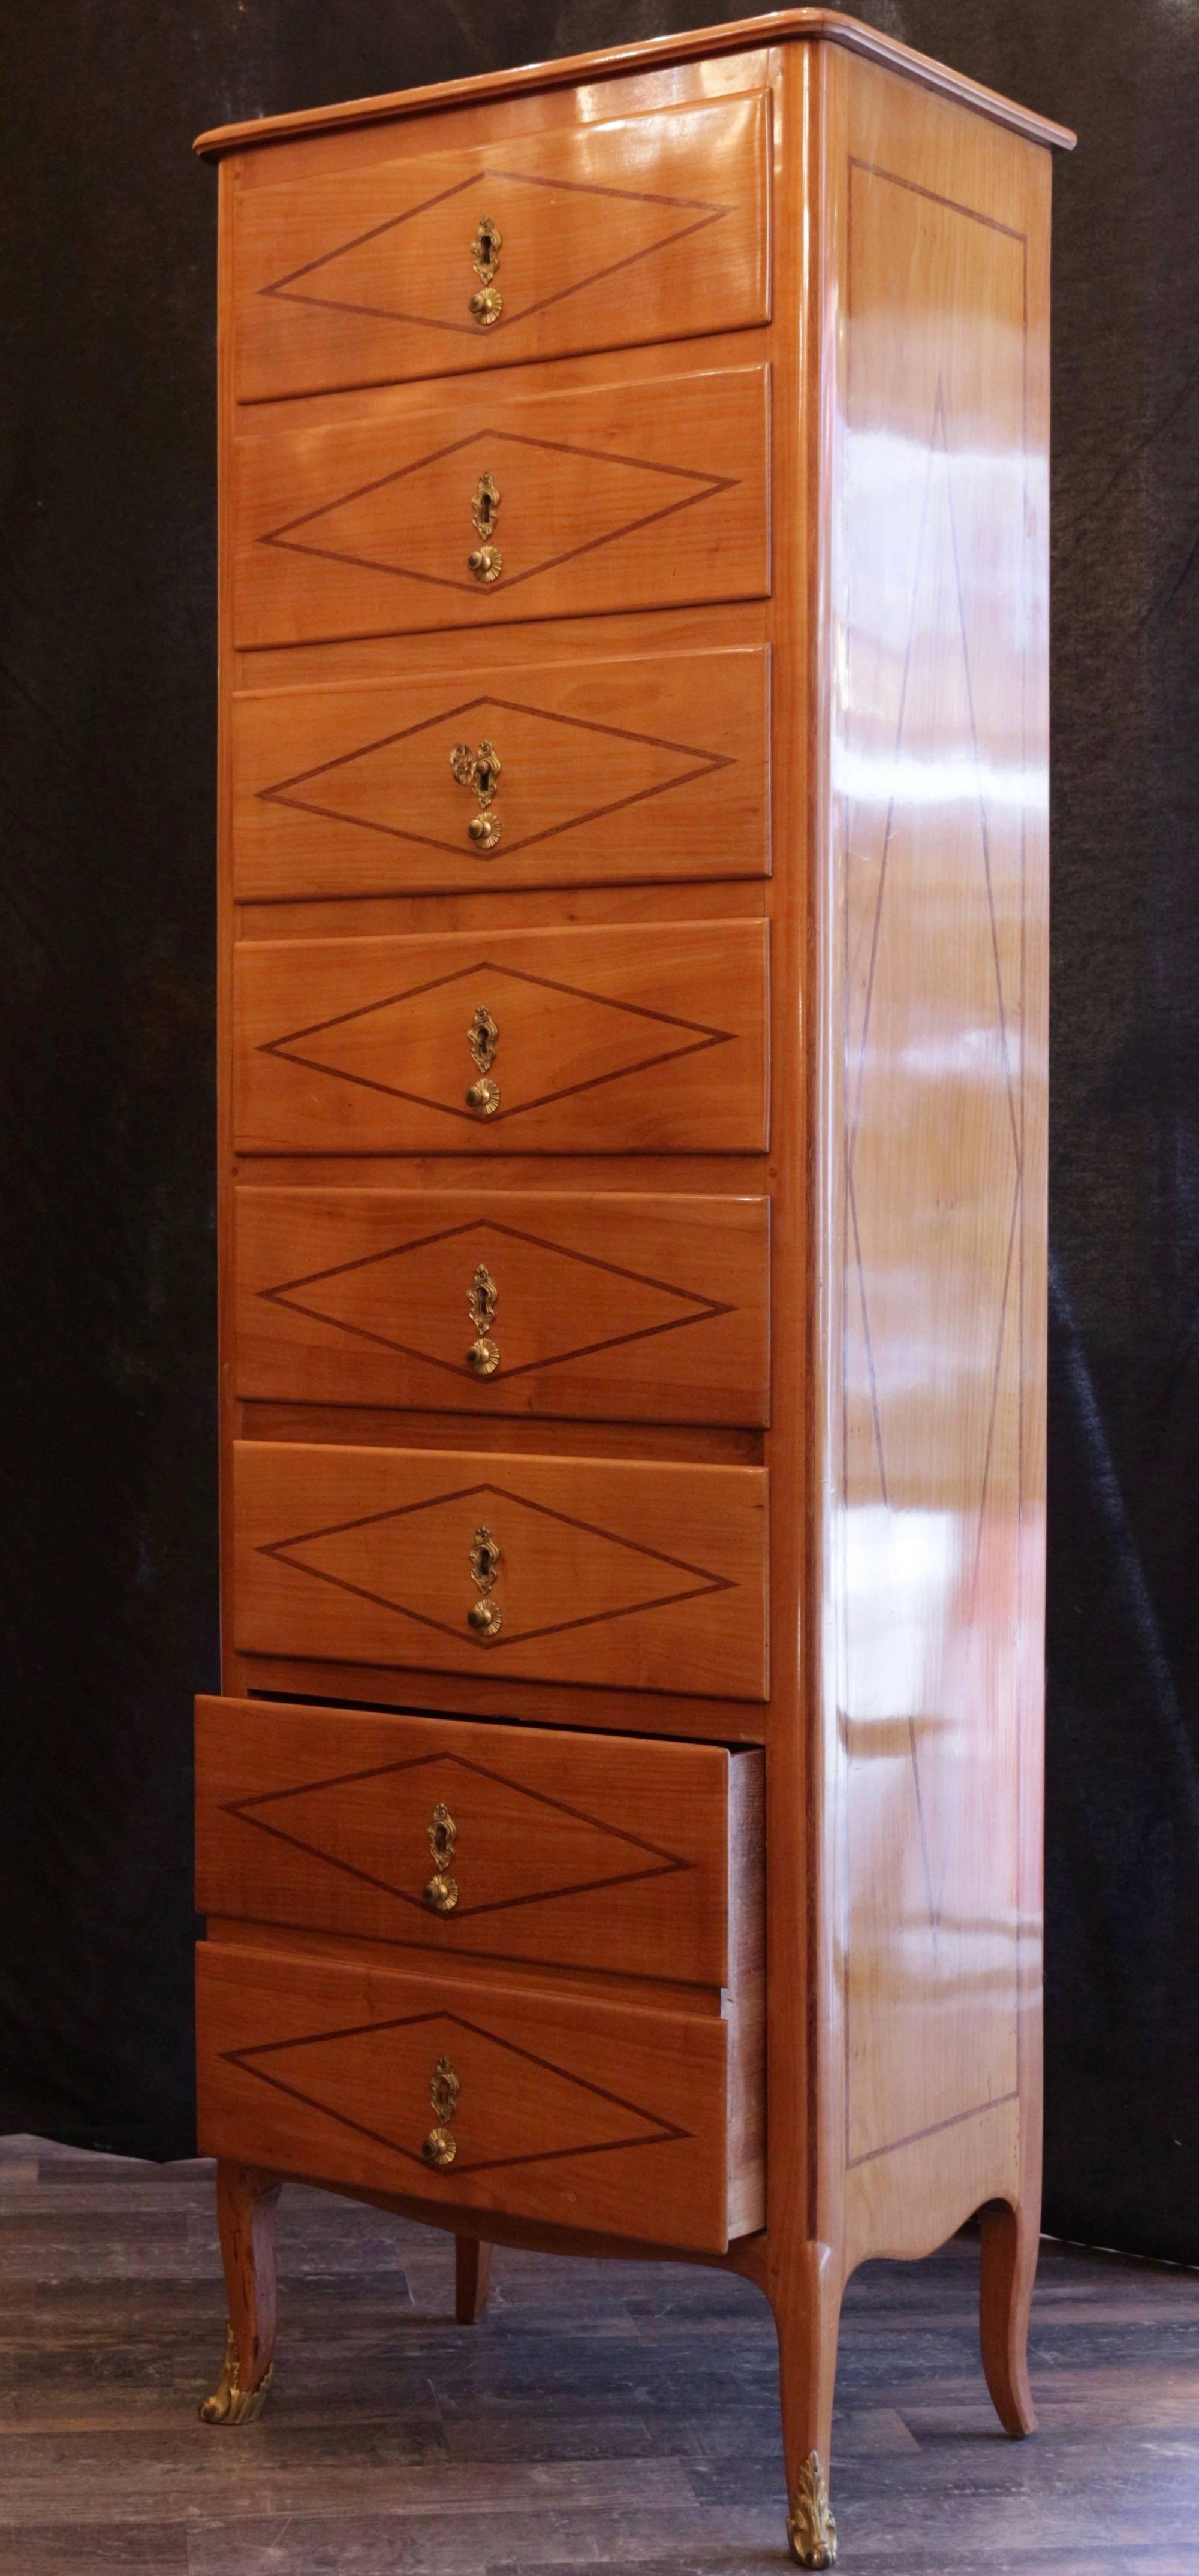 Louis XV French Transition Period Cherrywood Semainier by Pierre Macret, Mid-18th Century